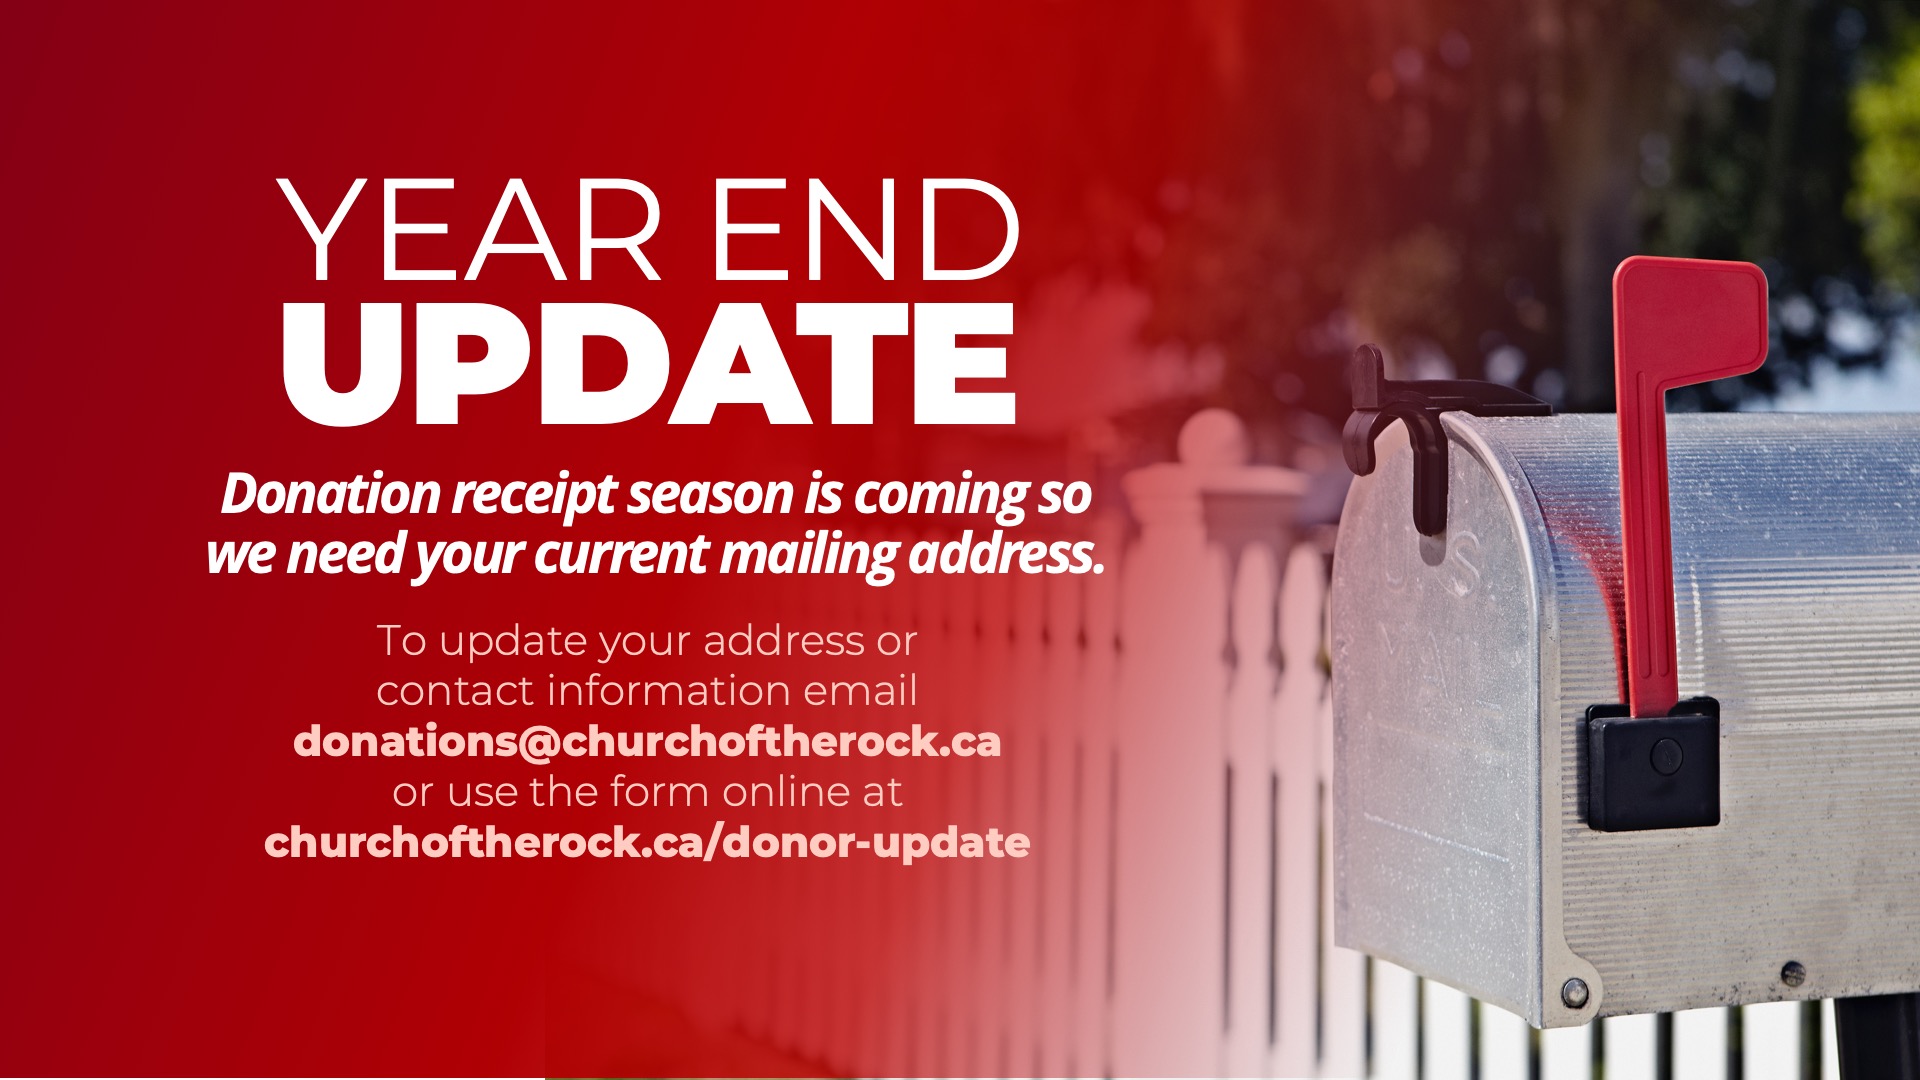 Year End Update Reminder Please don't forget to update your address and contact information. Donation receipt season is coming and we need your current contact information and mailing address. To submit an update, please email it to donations@churchoftherock.ca or go to our online Donor Update Form at churchoftherock.ca/donor-update.